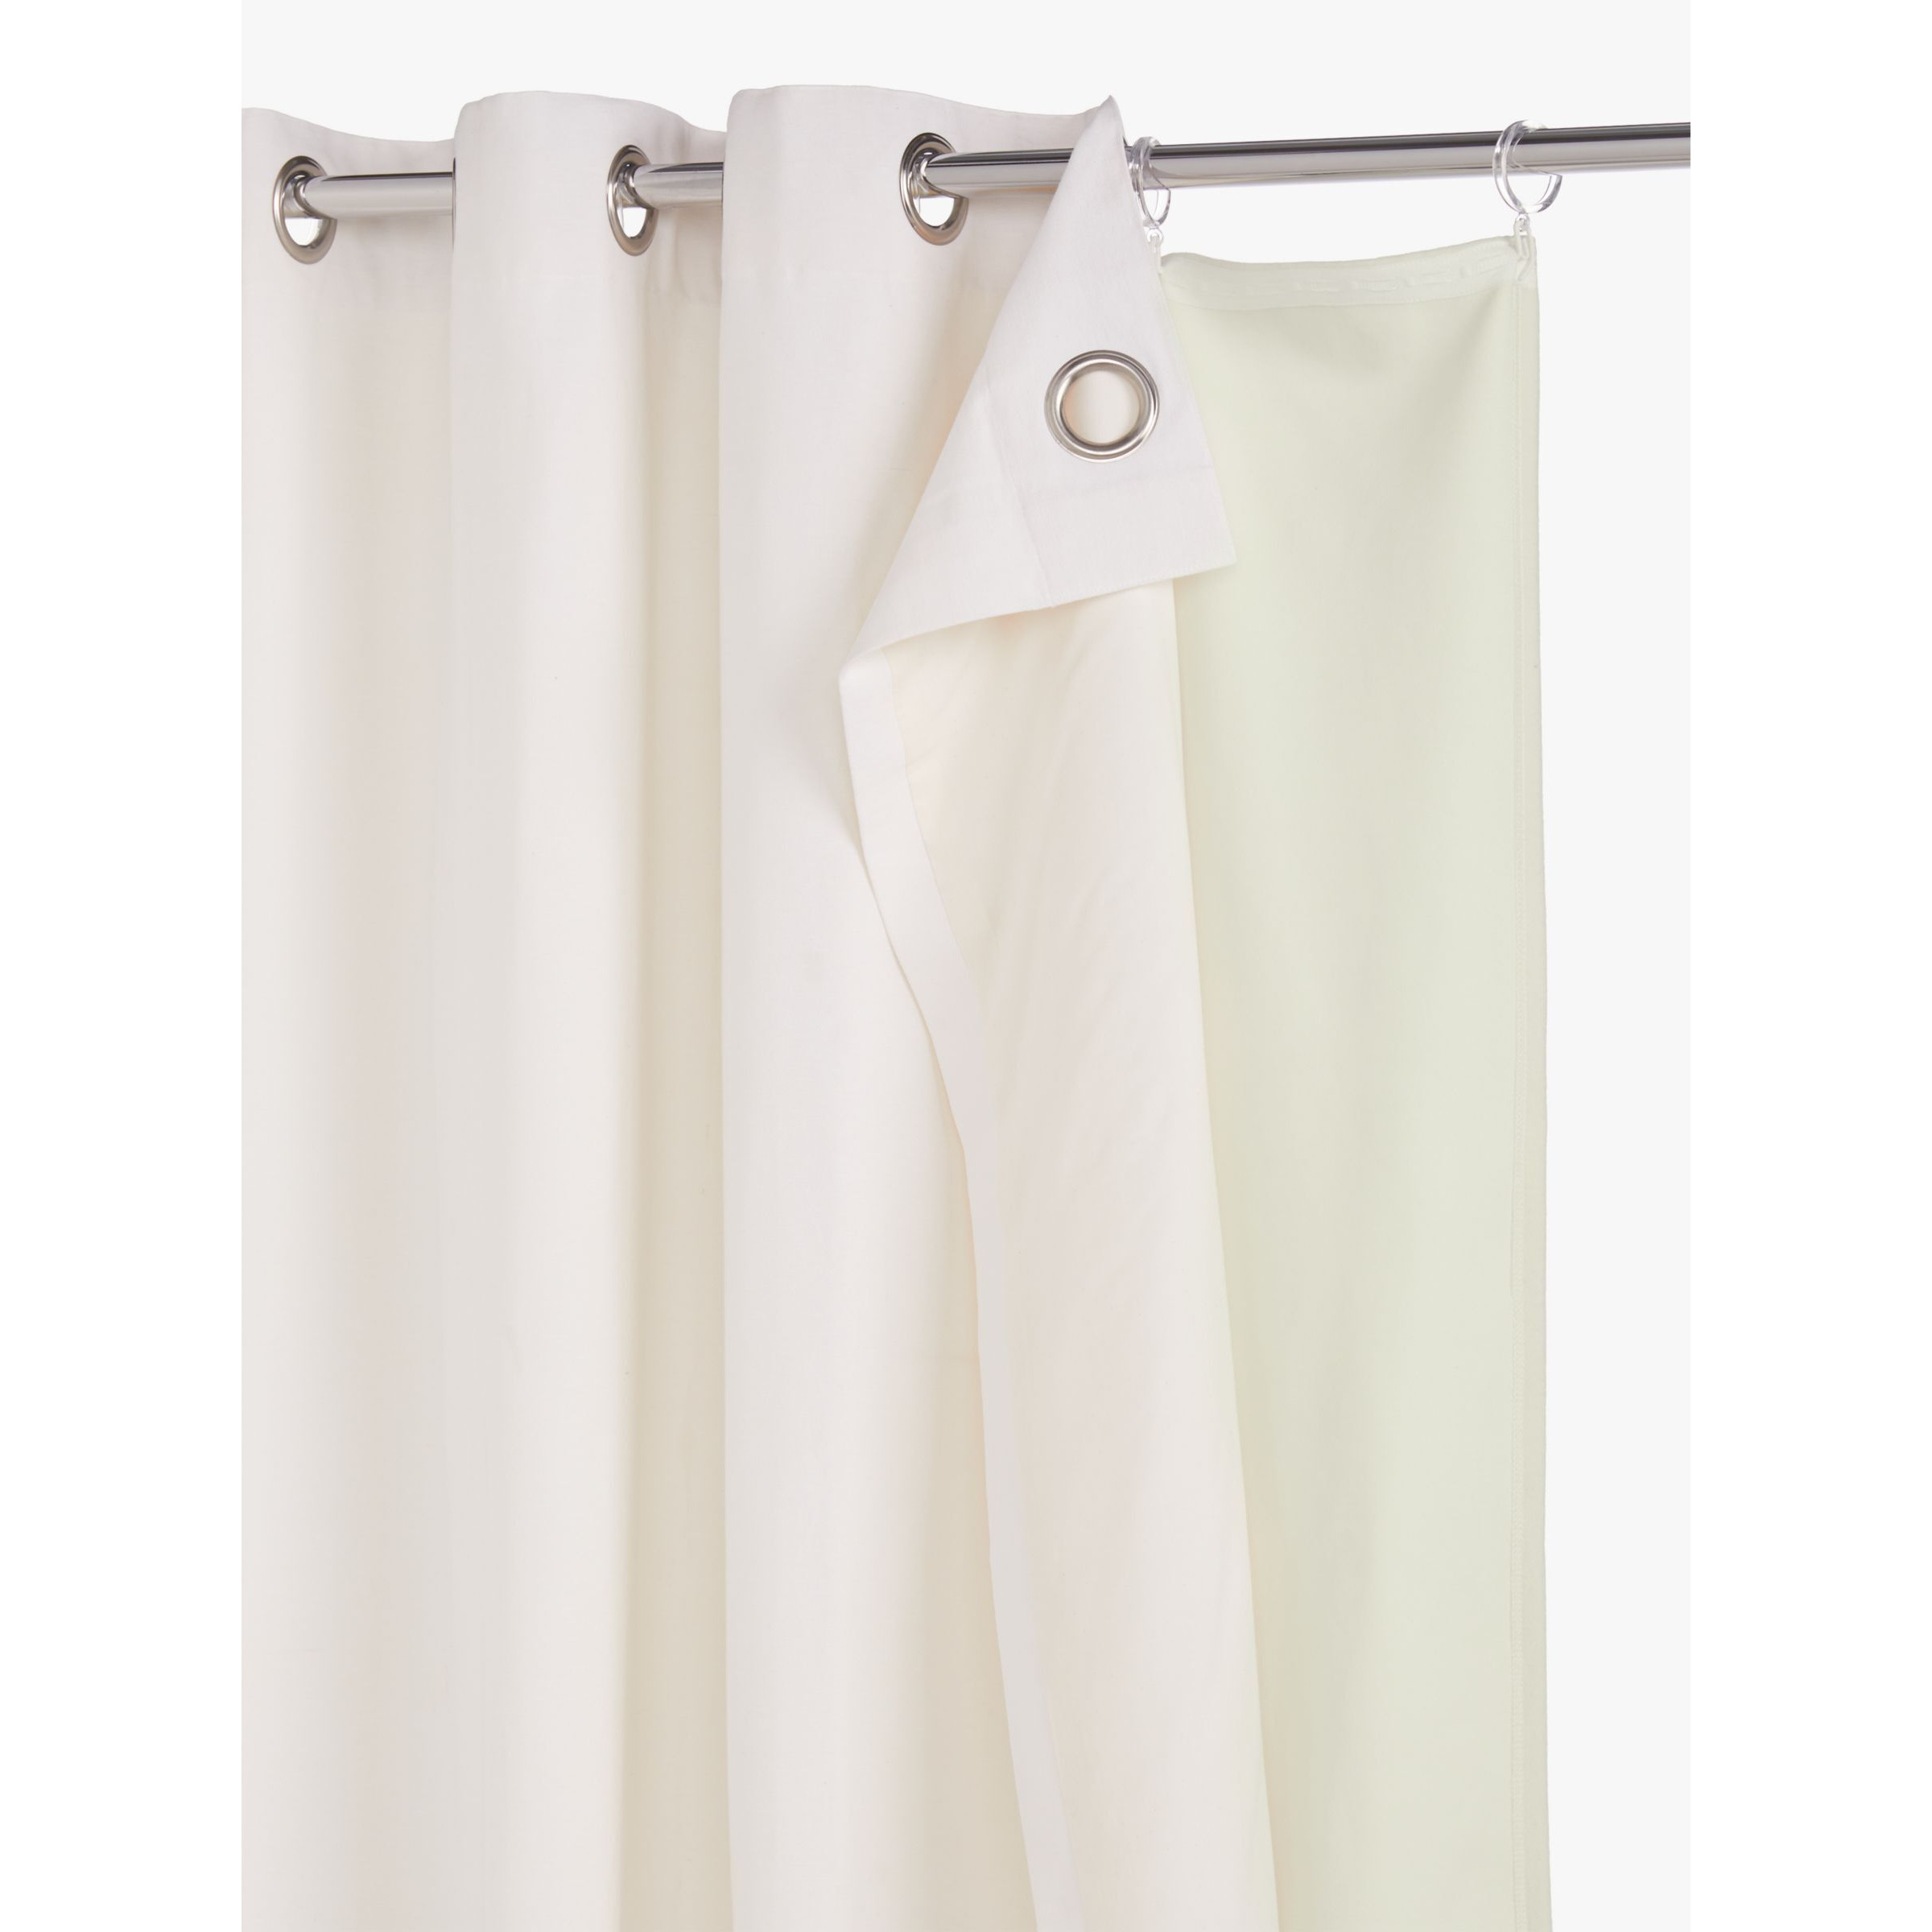 John Lewis ANYDAY Thermal Pencil Pleat & Eyelet Curtain Lining, Natural - image 1